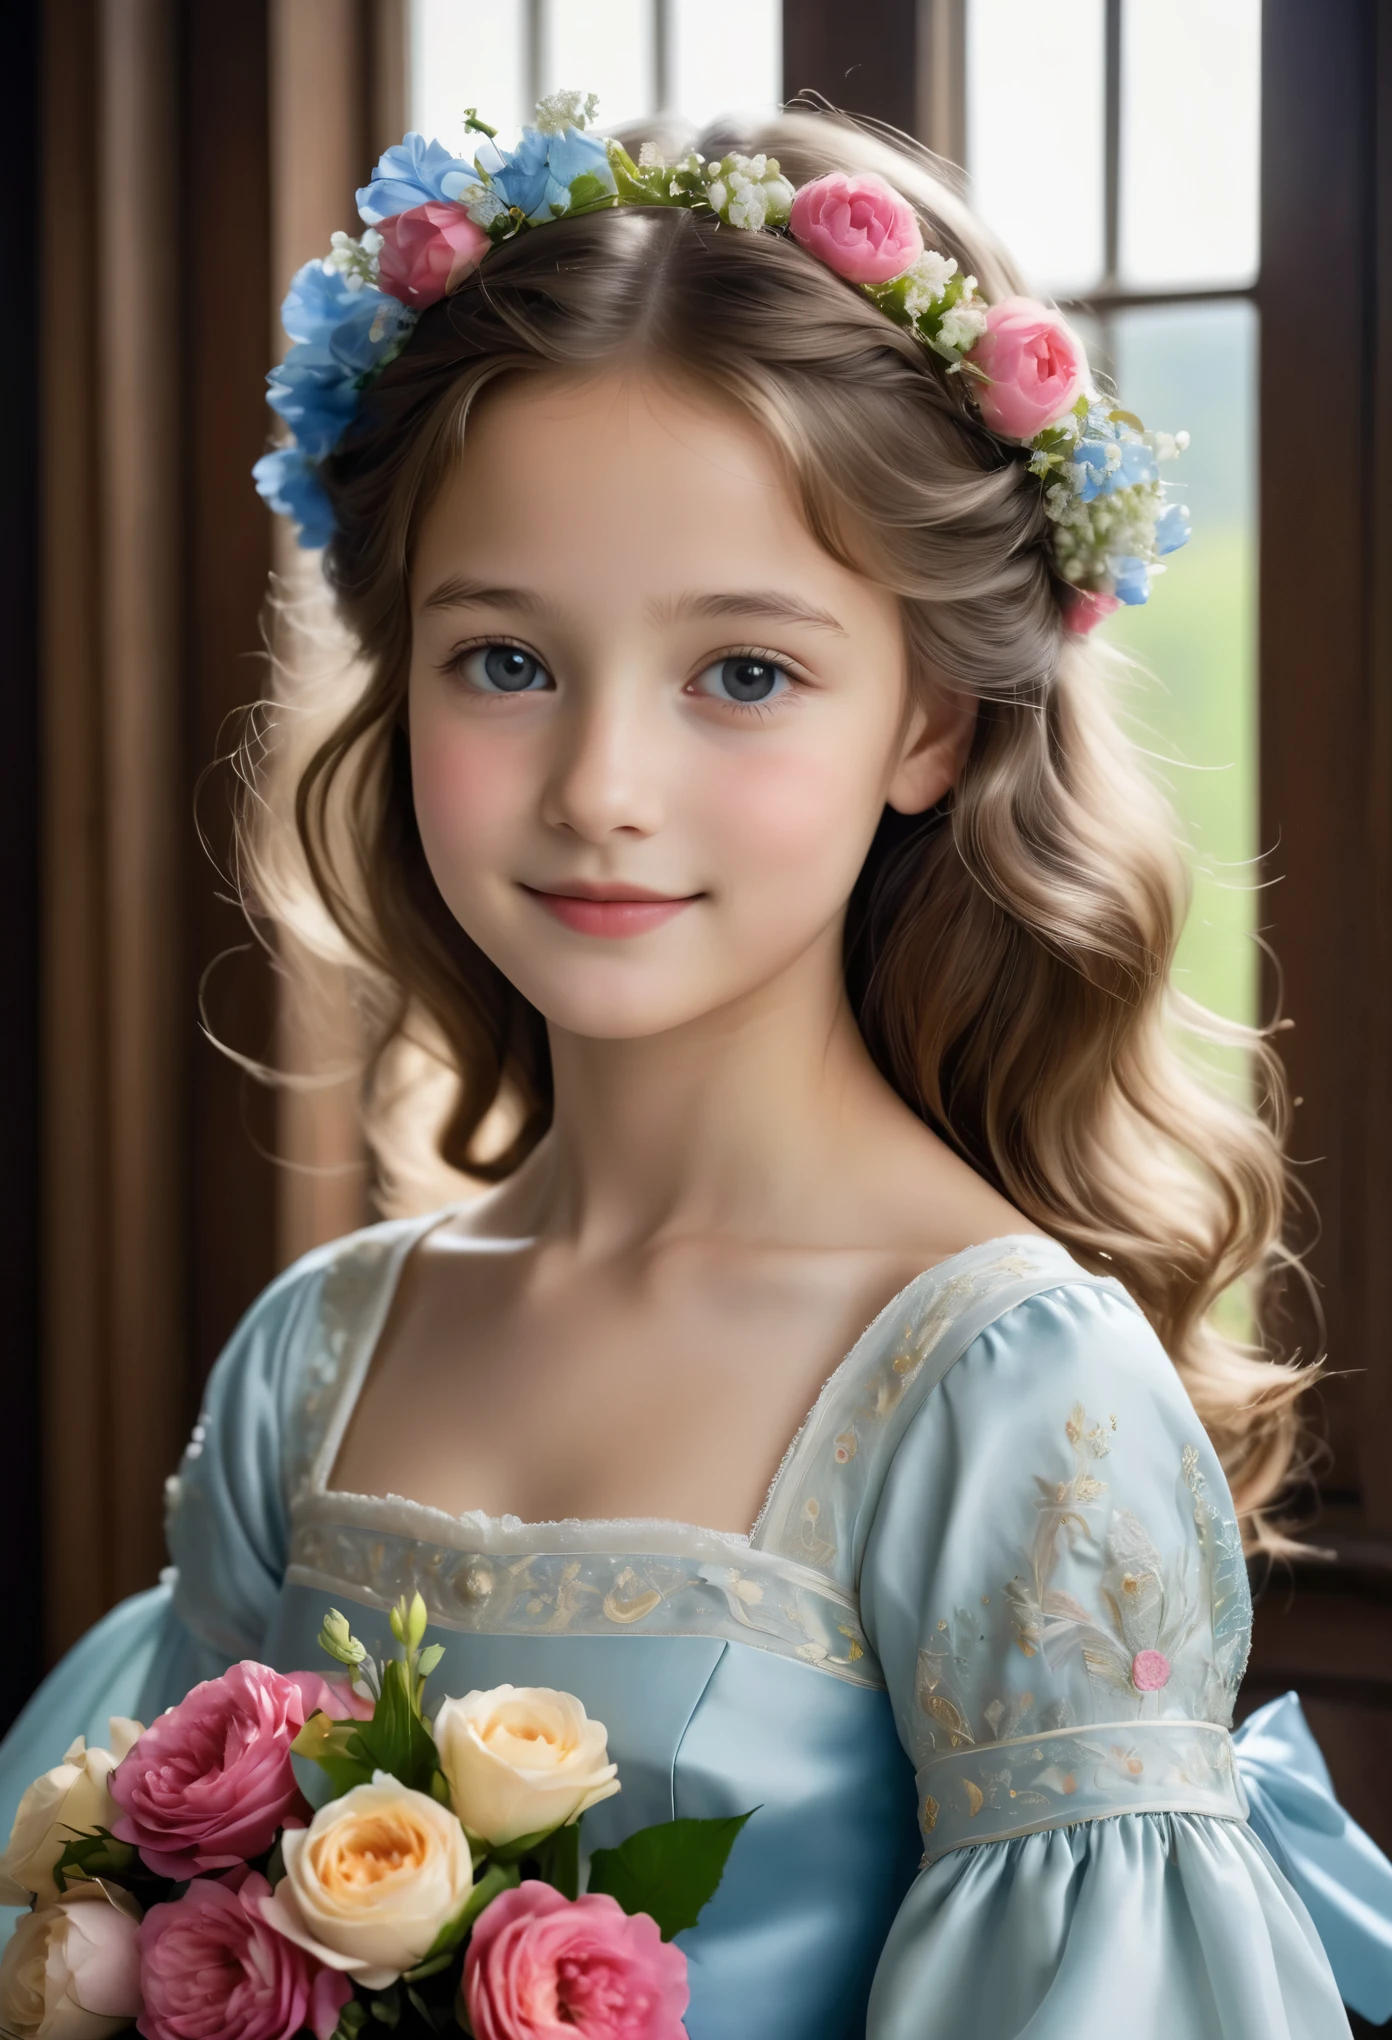 (best quality,4k,8k,highres,masterpiece:1.2), ultra-detailed, (realistic,photorealistic,photo-realistic:1.37),In the portrait of this enchanting 13-year-old girl, the daughter of a prosperous merchant during the flourishing 17th century in the Netherlands, every brushstroke captures the essence of her youth and innocence.

Her golden locks cascade in gentle waves, adorned with ribbons and pearls that speak of her family's affluence. Each curl seems to dance in the light, framing her cherubic face with an air of purity and grace. Her eyes, wide and bright, reflect the curiosity and wonder of childhood, as if every glance is filled with endless possibilities.

Her rosy cheeks flush with vitality, a testament to her health and happiness in the embrace of her privileged upbringing. A delicate dimple graces her smile, adding a touch of sweetness to her countenance that is as charming as it is captivating.

Dressed in the finest silks and lace, her gown whispers softly with every movement, a symphony of luxury and refinement. Embroidered motifs and intricate details adorn her attire, showcasing the exquisite craftsmanship of the era and her family's esteemed status in society.

In her hands, she holds a posy of fresh flowers, their vibrant colors mirroring the bloom of her youth. With each delicate petal, she seems to embody the essence of spring itself, a beacon of hope and renewal in a world filled with uncertainty.

This portrait of the 12-year-old daughter of a prosperous Dutch merchant is not just a representation of beauty; it's a window into a bygone era of elegance, privilege, and the timeless innocence of youth.